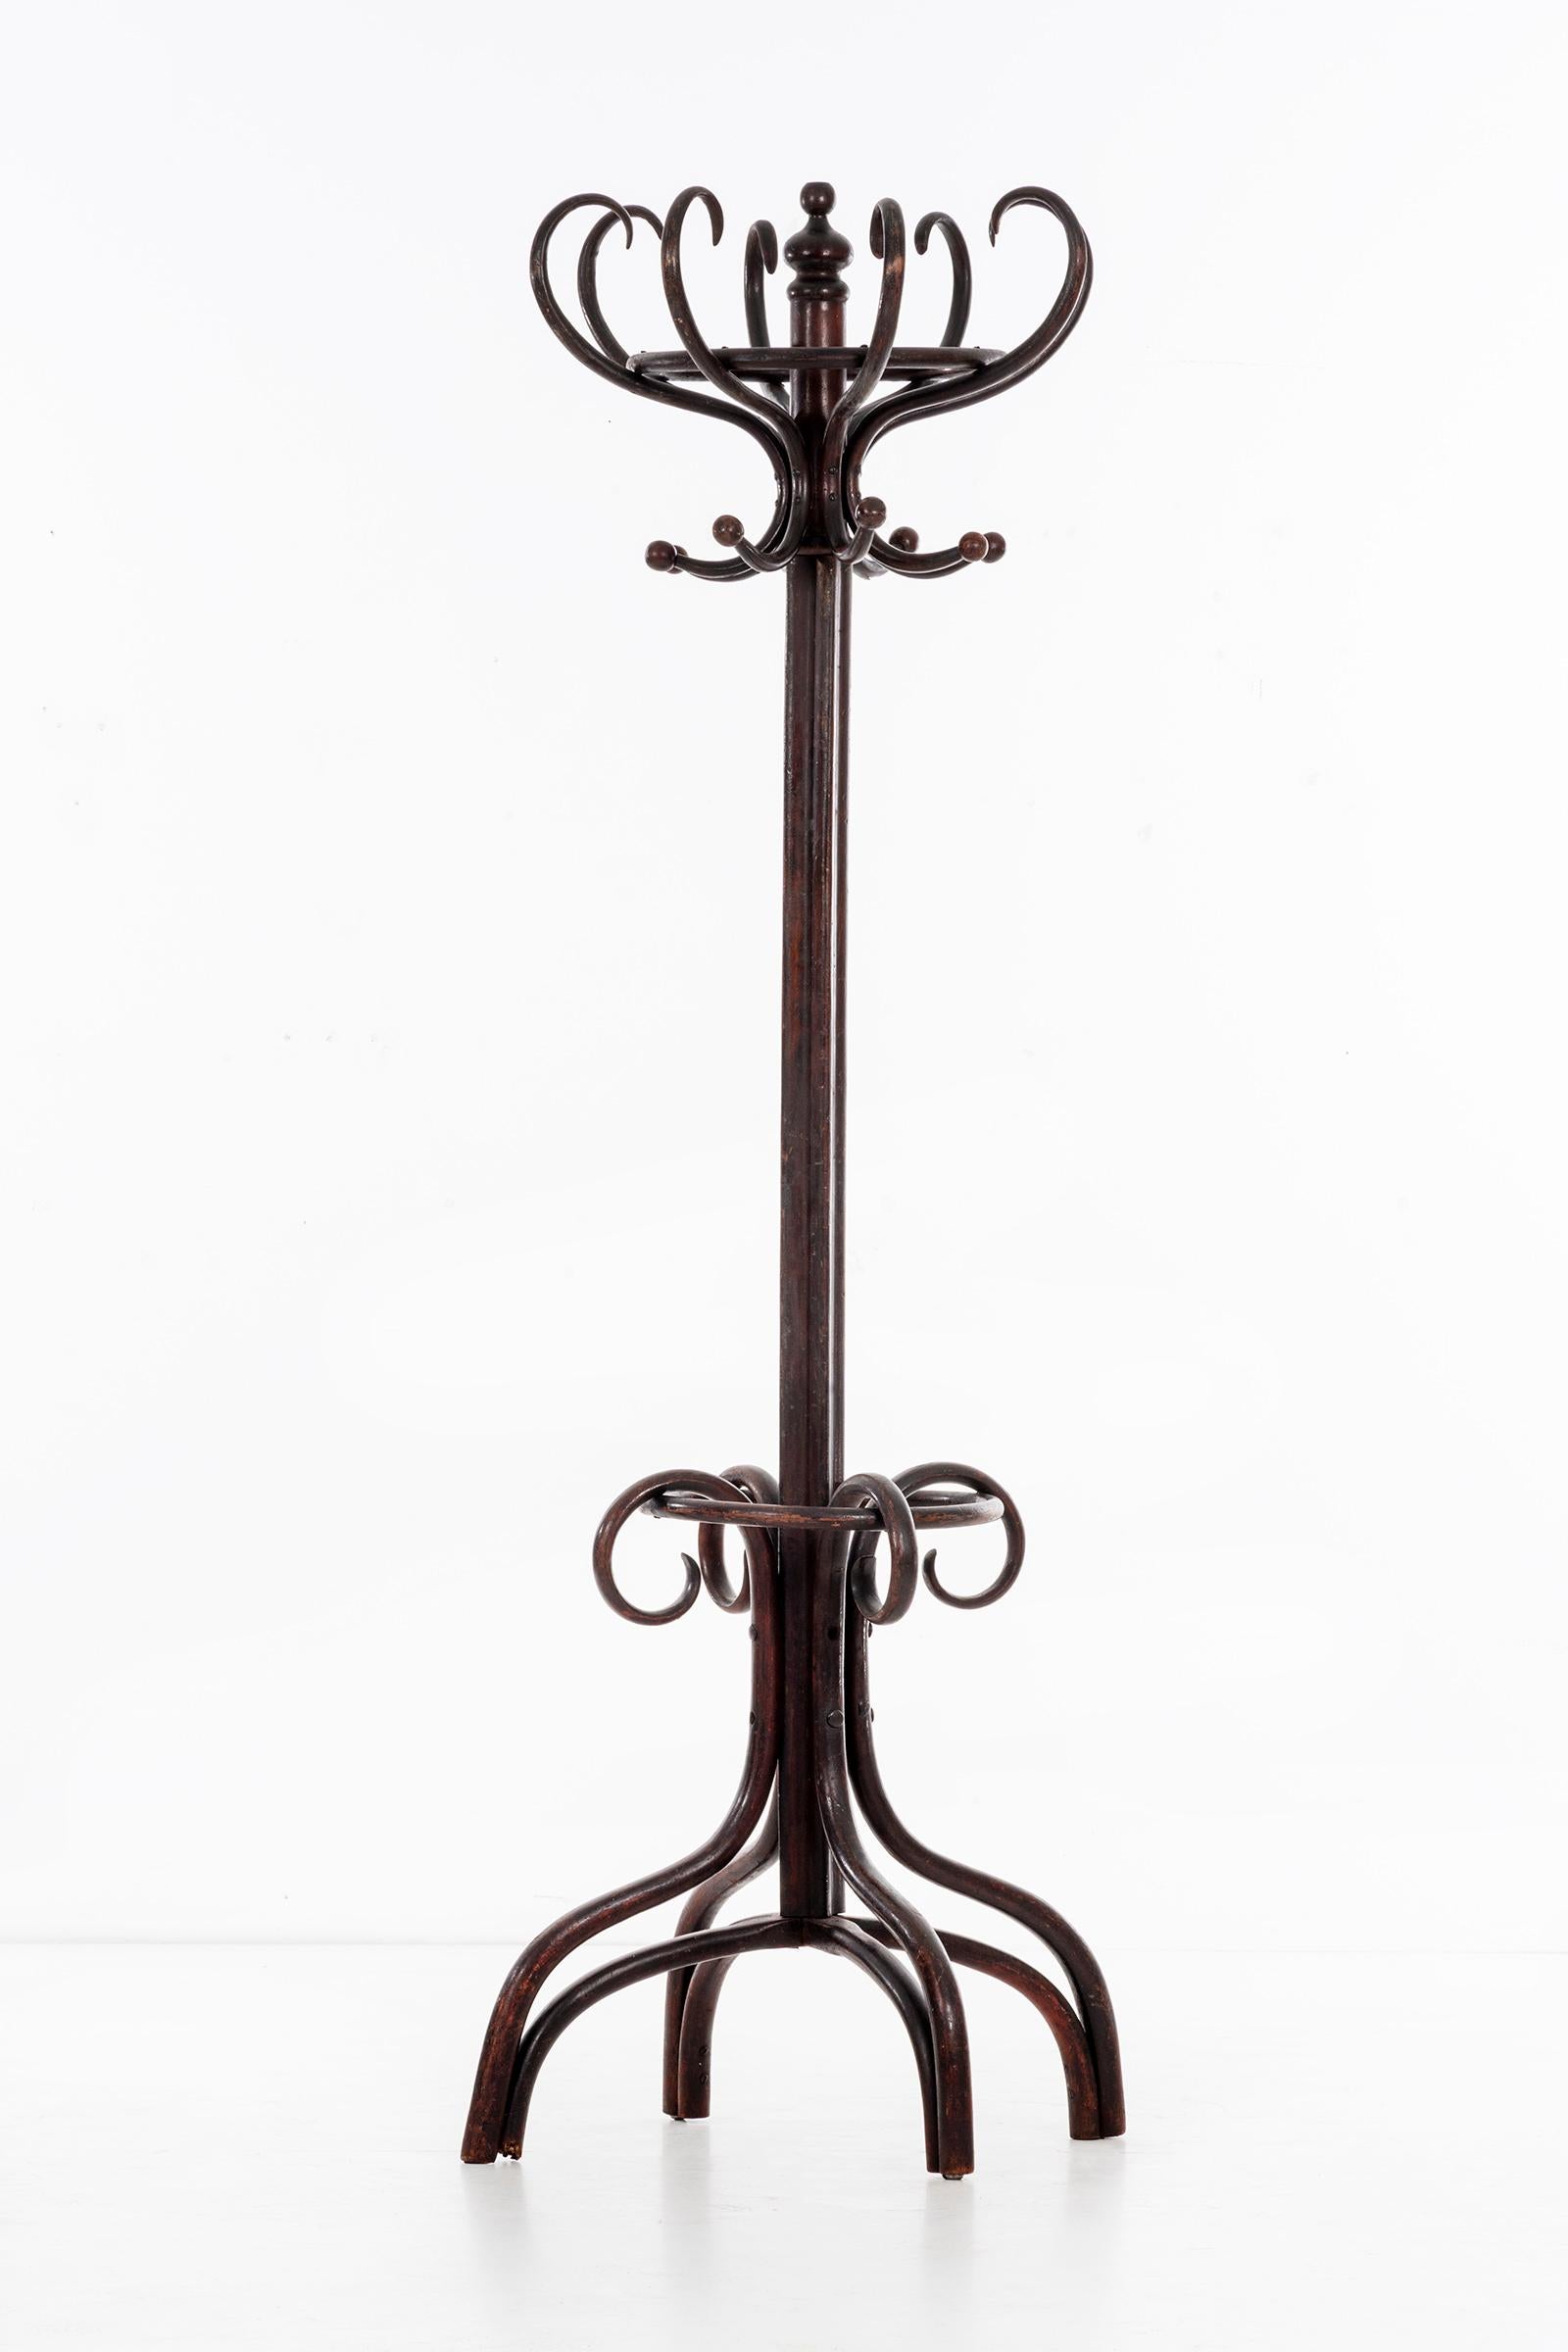 Thonet Coatrack, stained oakwood bentwood furniture design with lacquer finish.